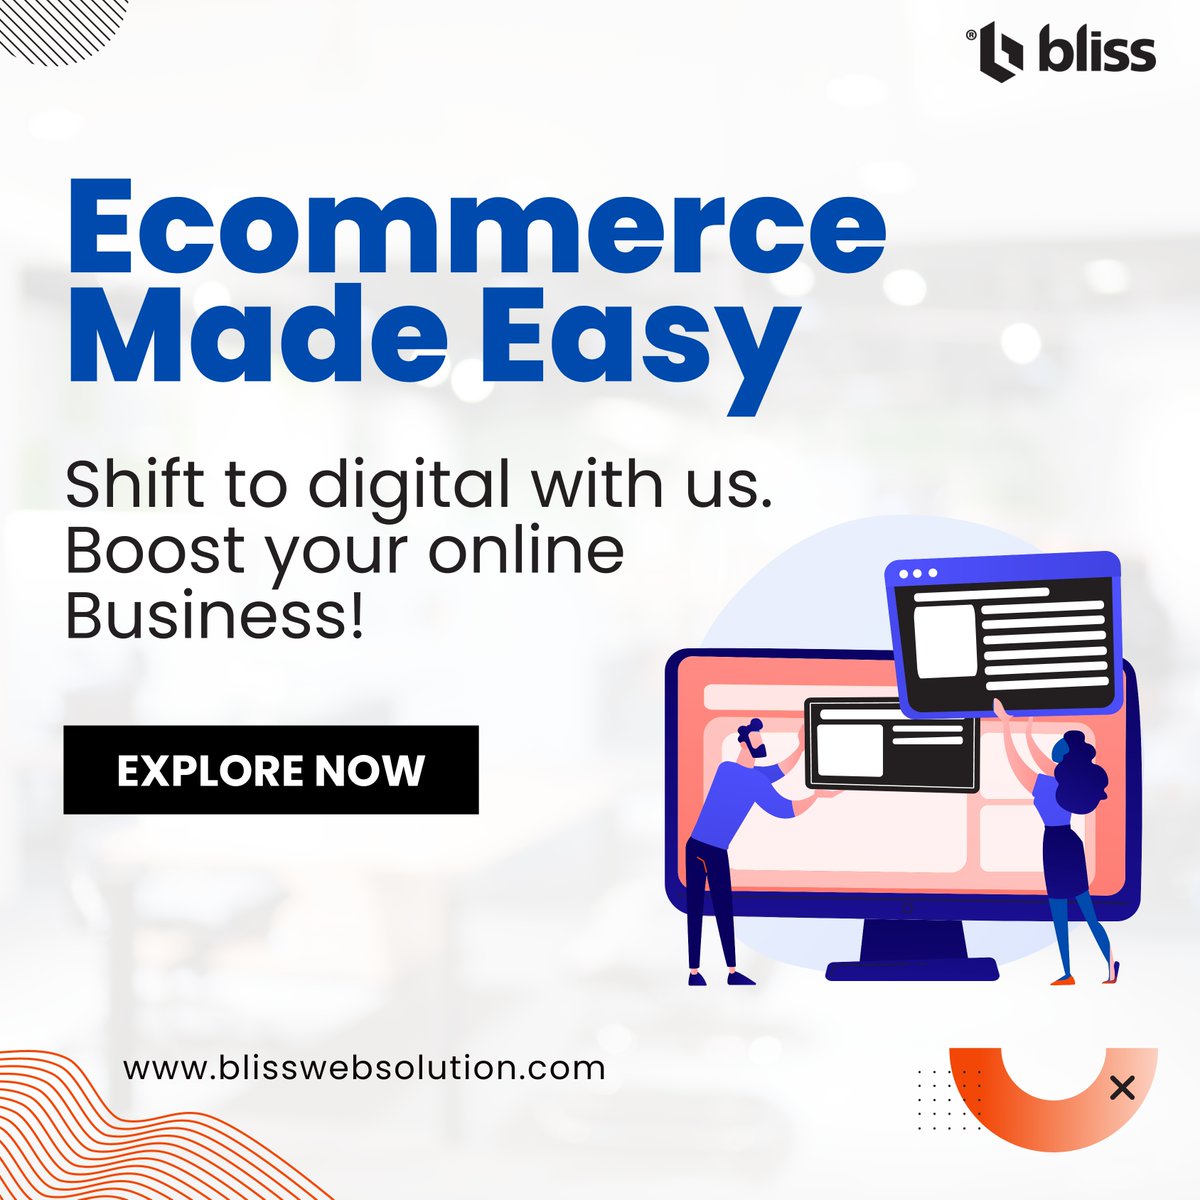 Make Ecommerce easy! Shift your business to the digital world with us and see the growth.

#EcommerceMadeEasy #DigitalShift #BoostBusiness #OnlineSales #USA #NYC #LA #Chicago #Houston #Philly #Phoenix #SanAntonio #SanDiego #Dallas #Austin #Jacksonville